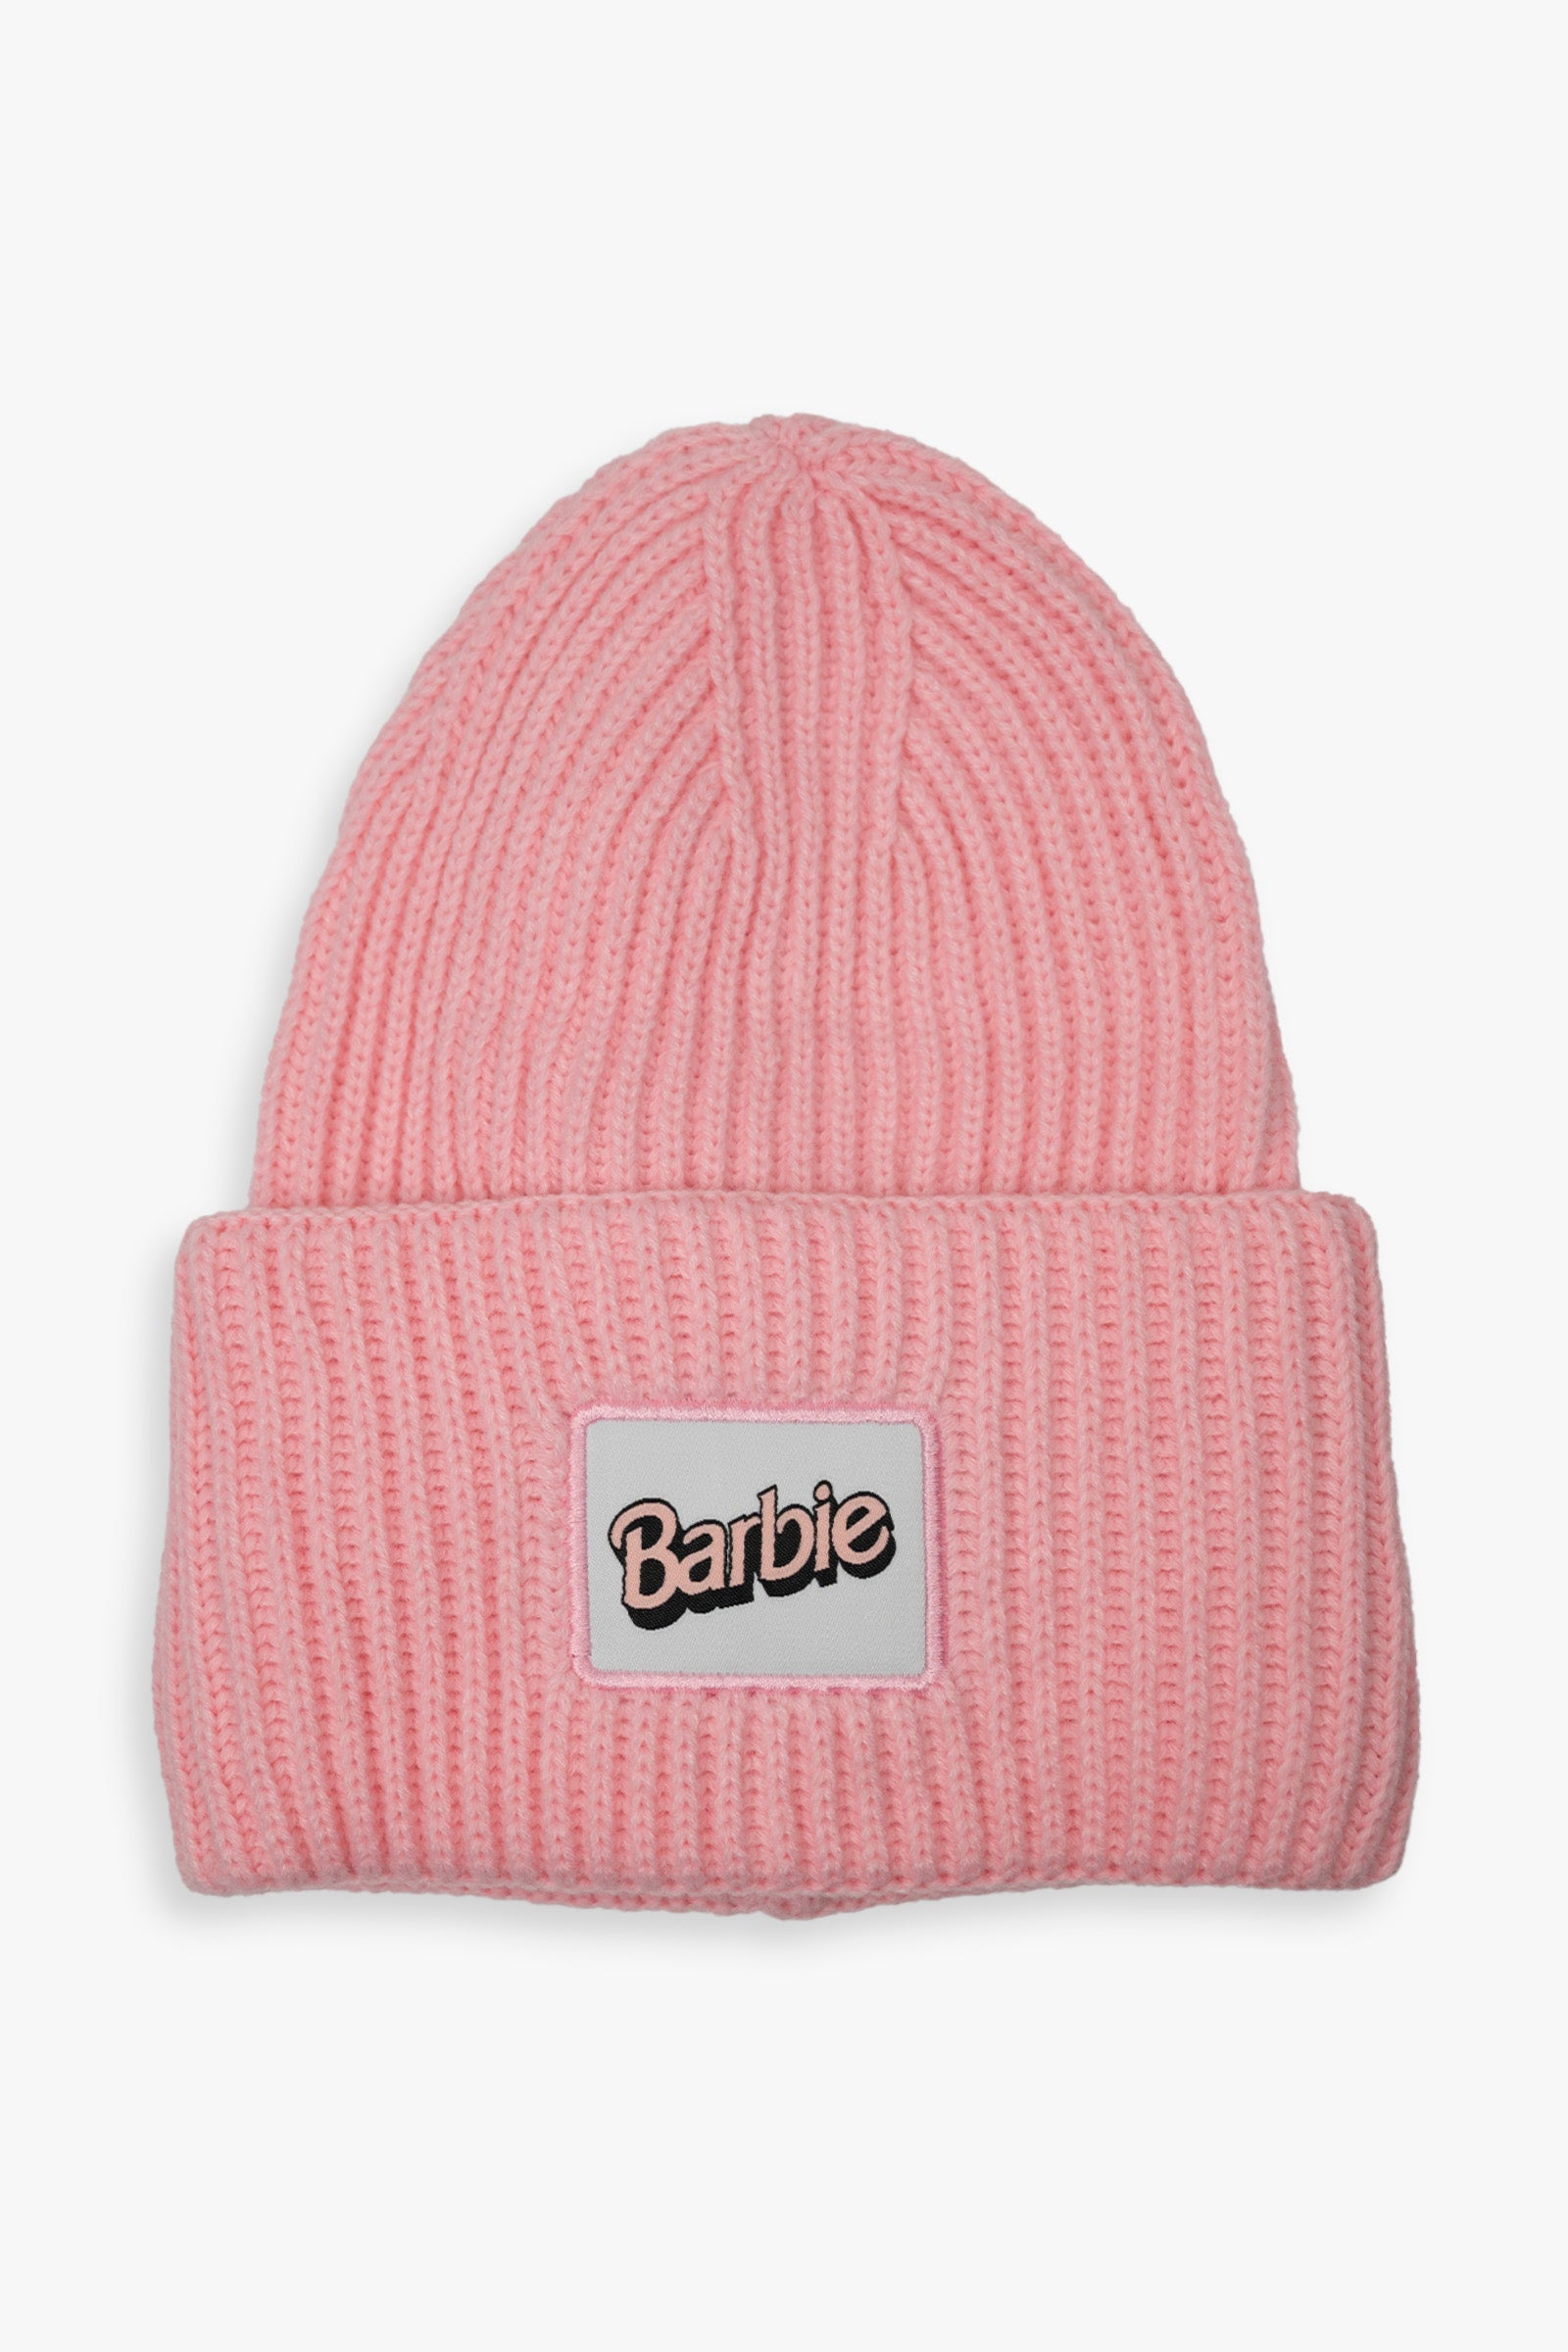 Barbie Ladies Oversized Cuff Beanie Featuring a Woven Patch